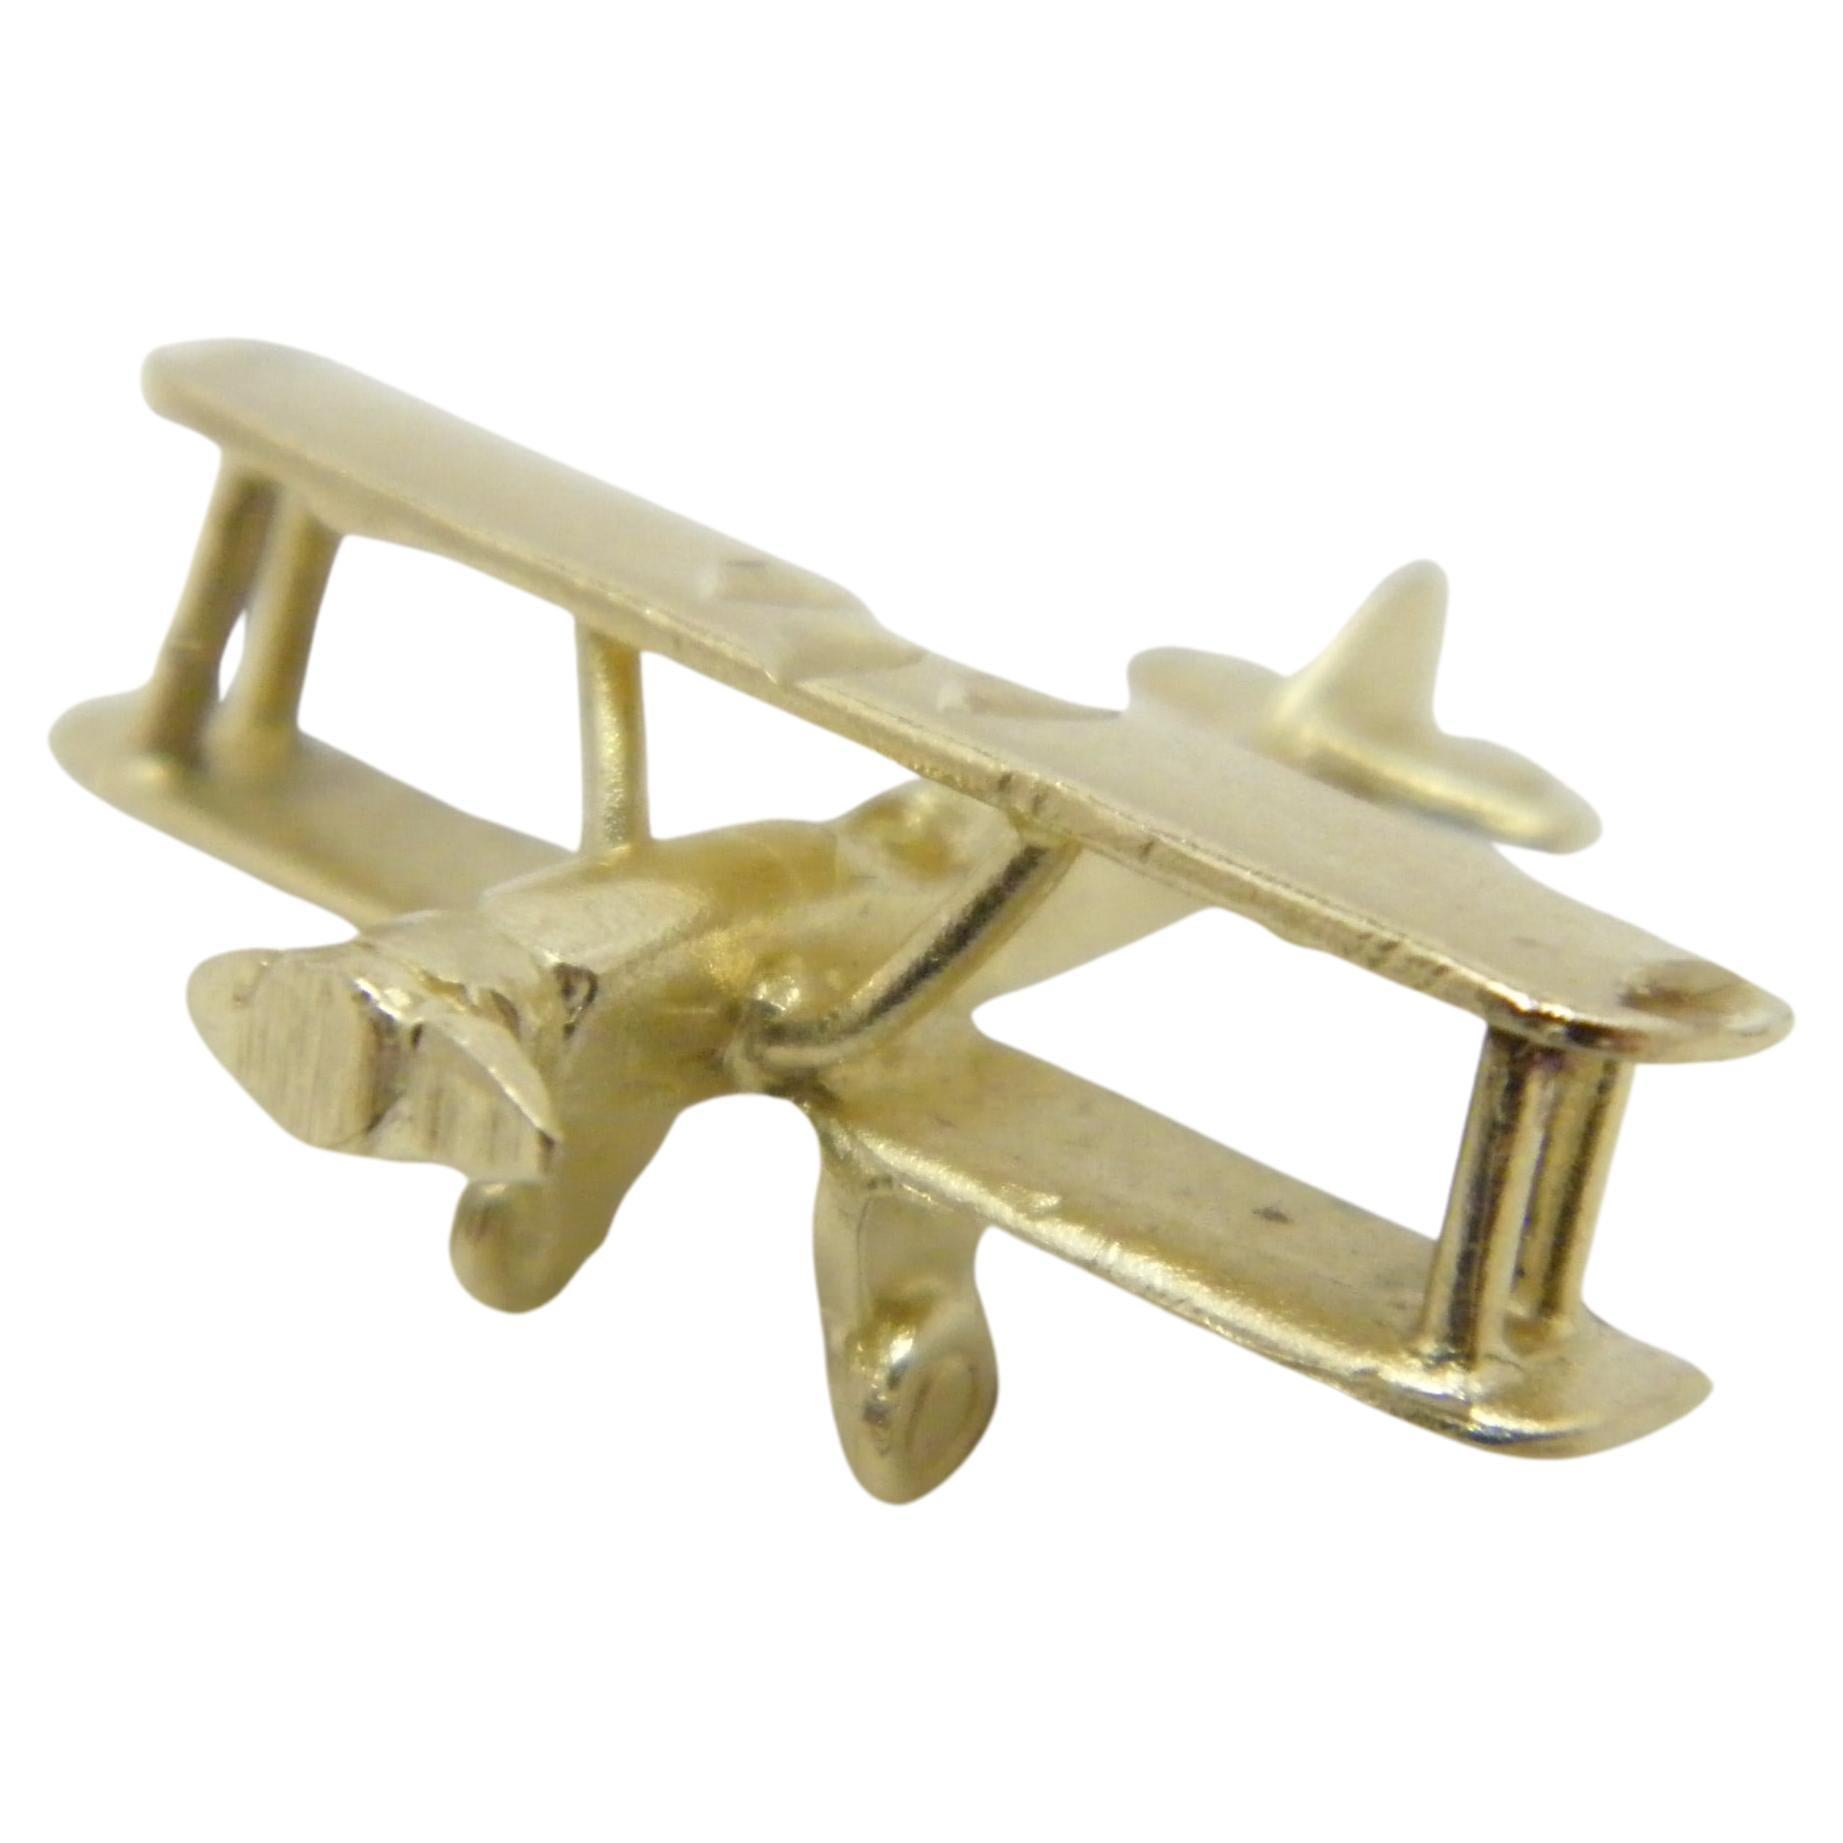 Vintage 14ct Gold Biplane Aeroplane Model Charm Fob c1970s 585 Purity Heavy For Sale